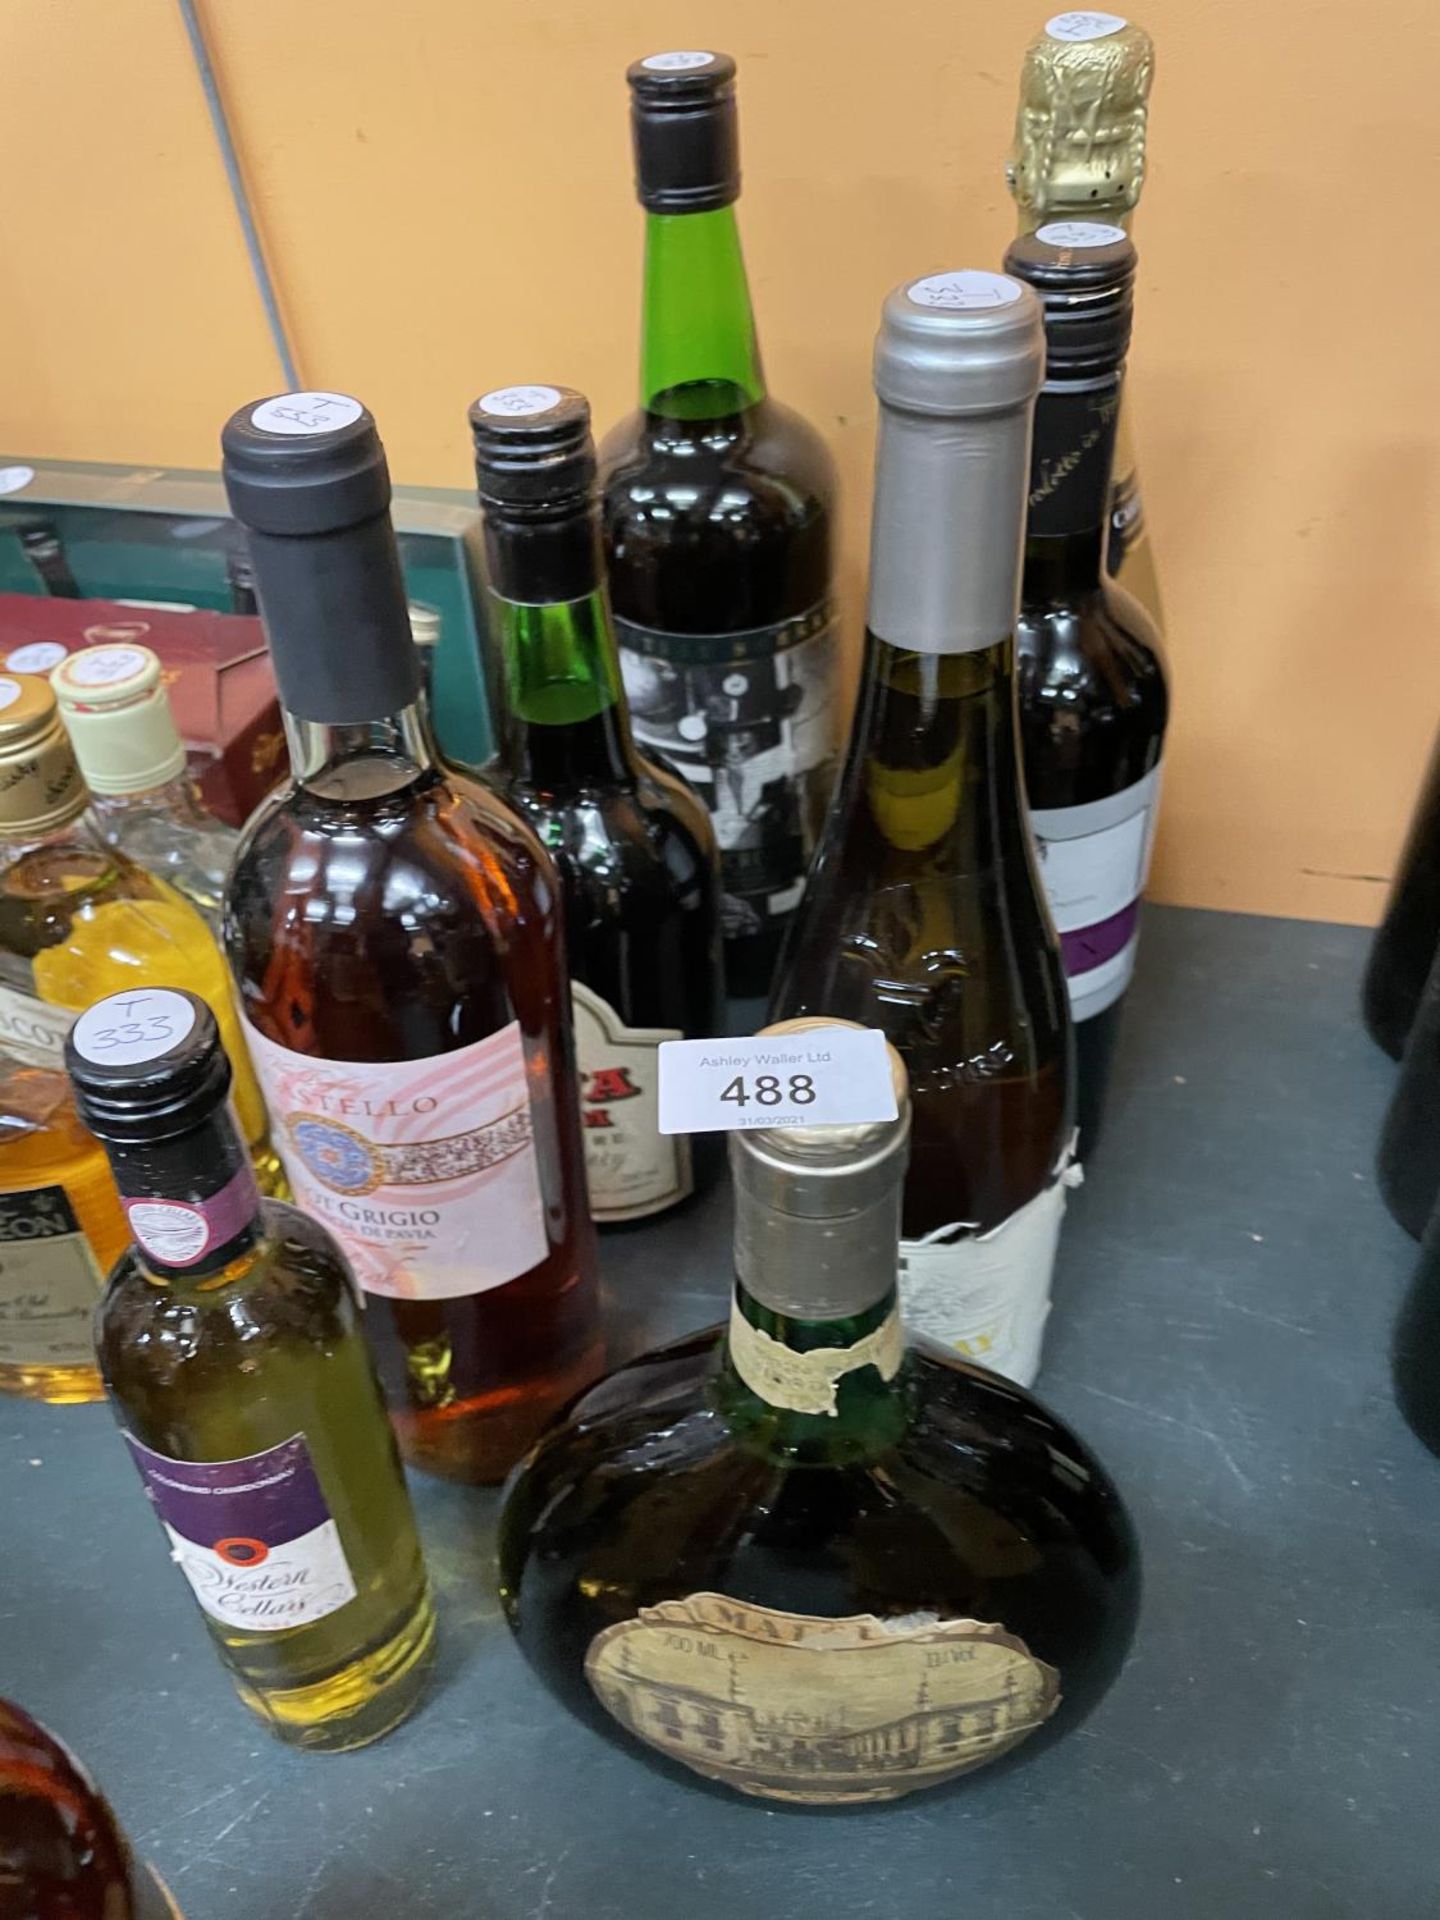 A QUANTITY OF WINES AND SHERRY TO INCLUDE MATEUS ROSE, DACASTELLA PINOT BLUSH AND EMVA CREAM FULL